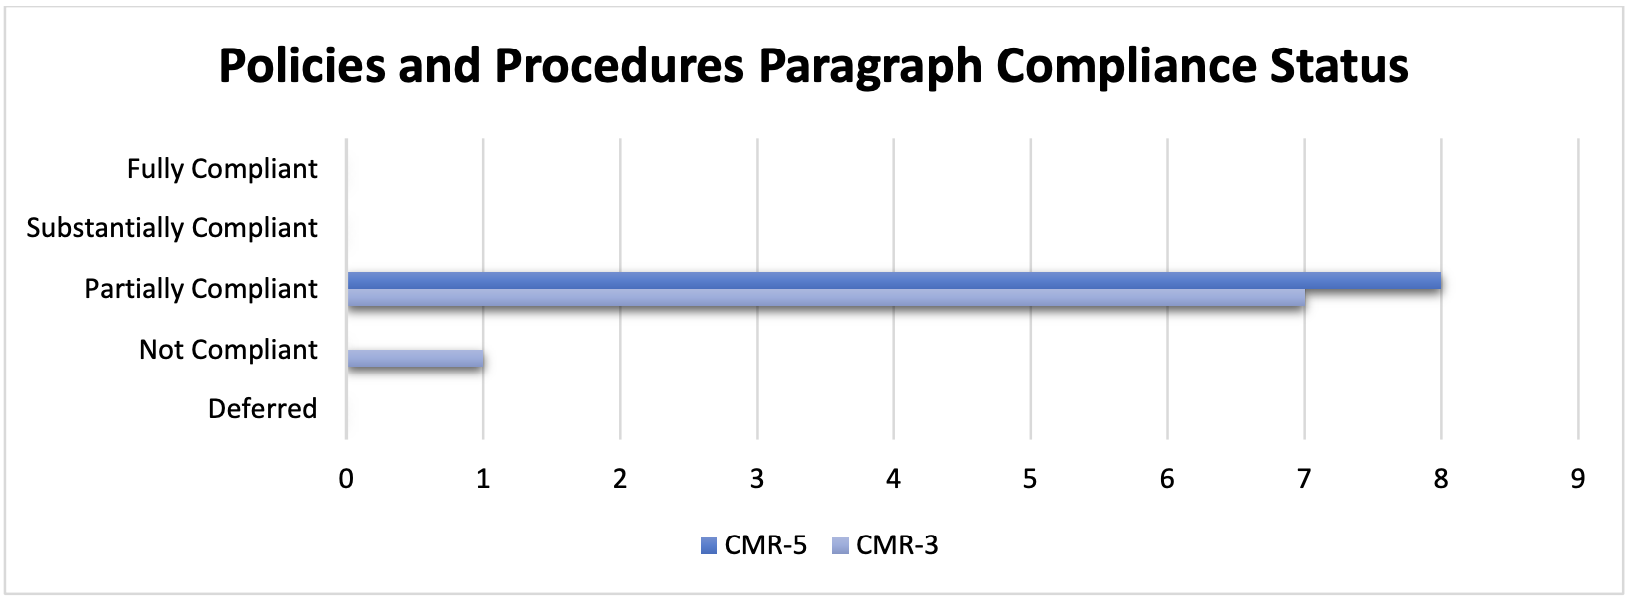 Figure 5. Policies and Procedures: Paragraph Compliance Status